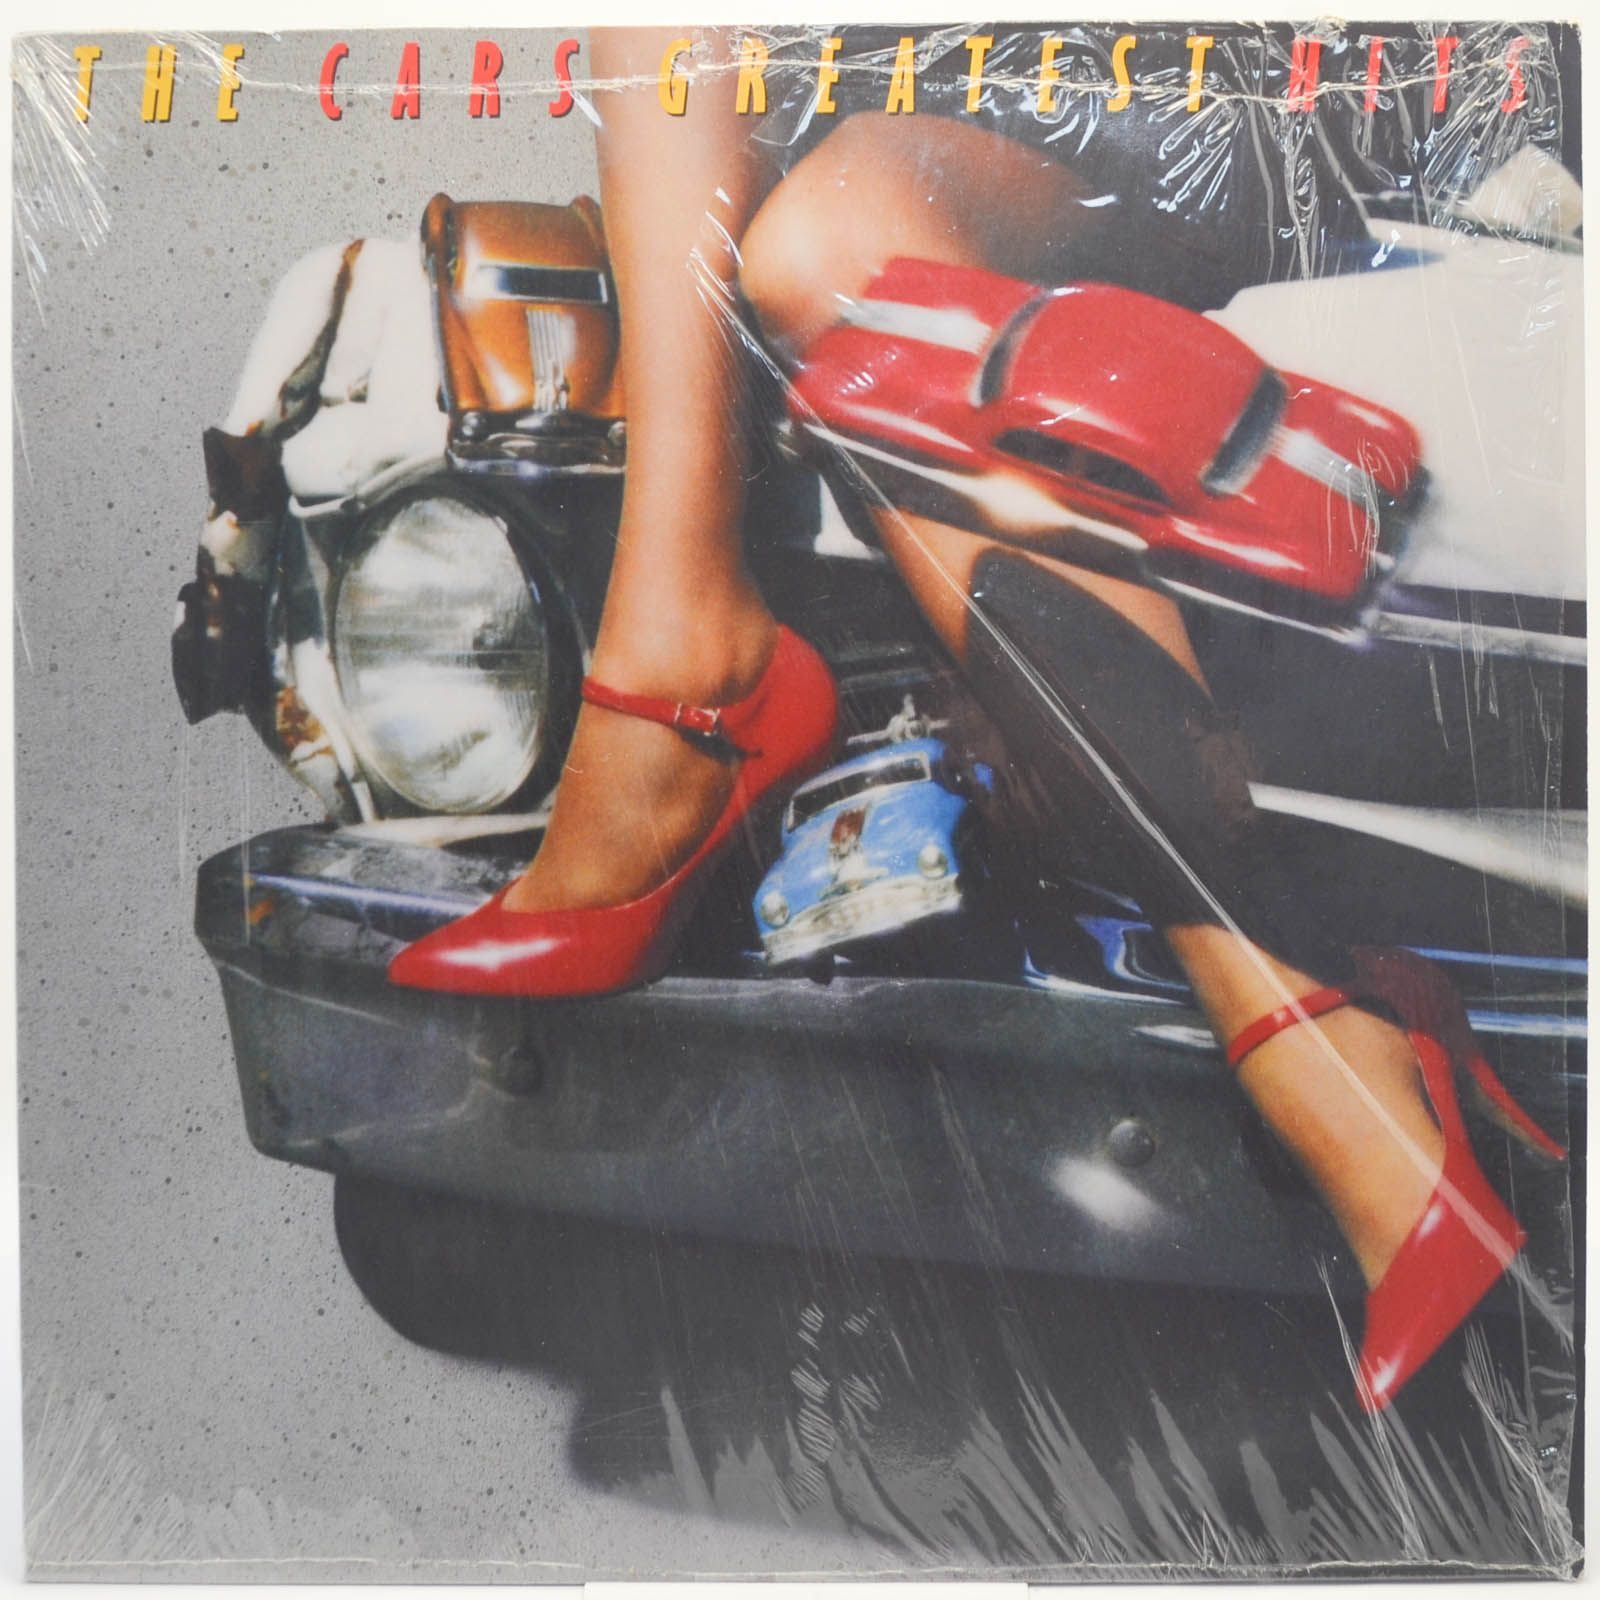 Cars — The Cars Greatest Hits, 1985